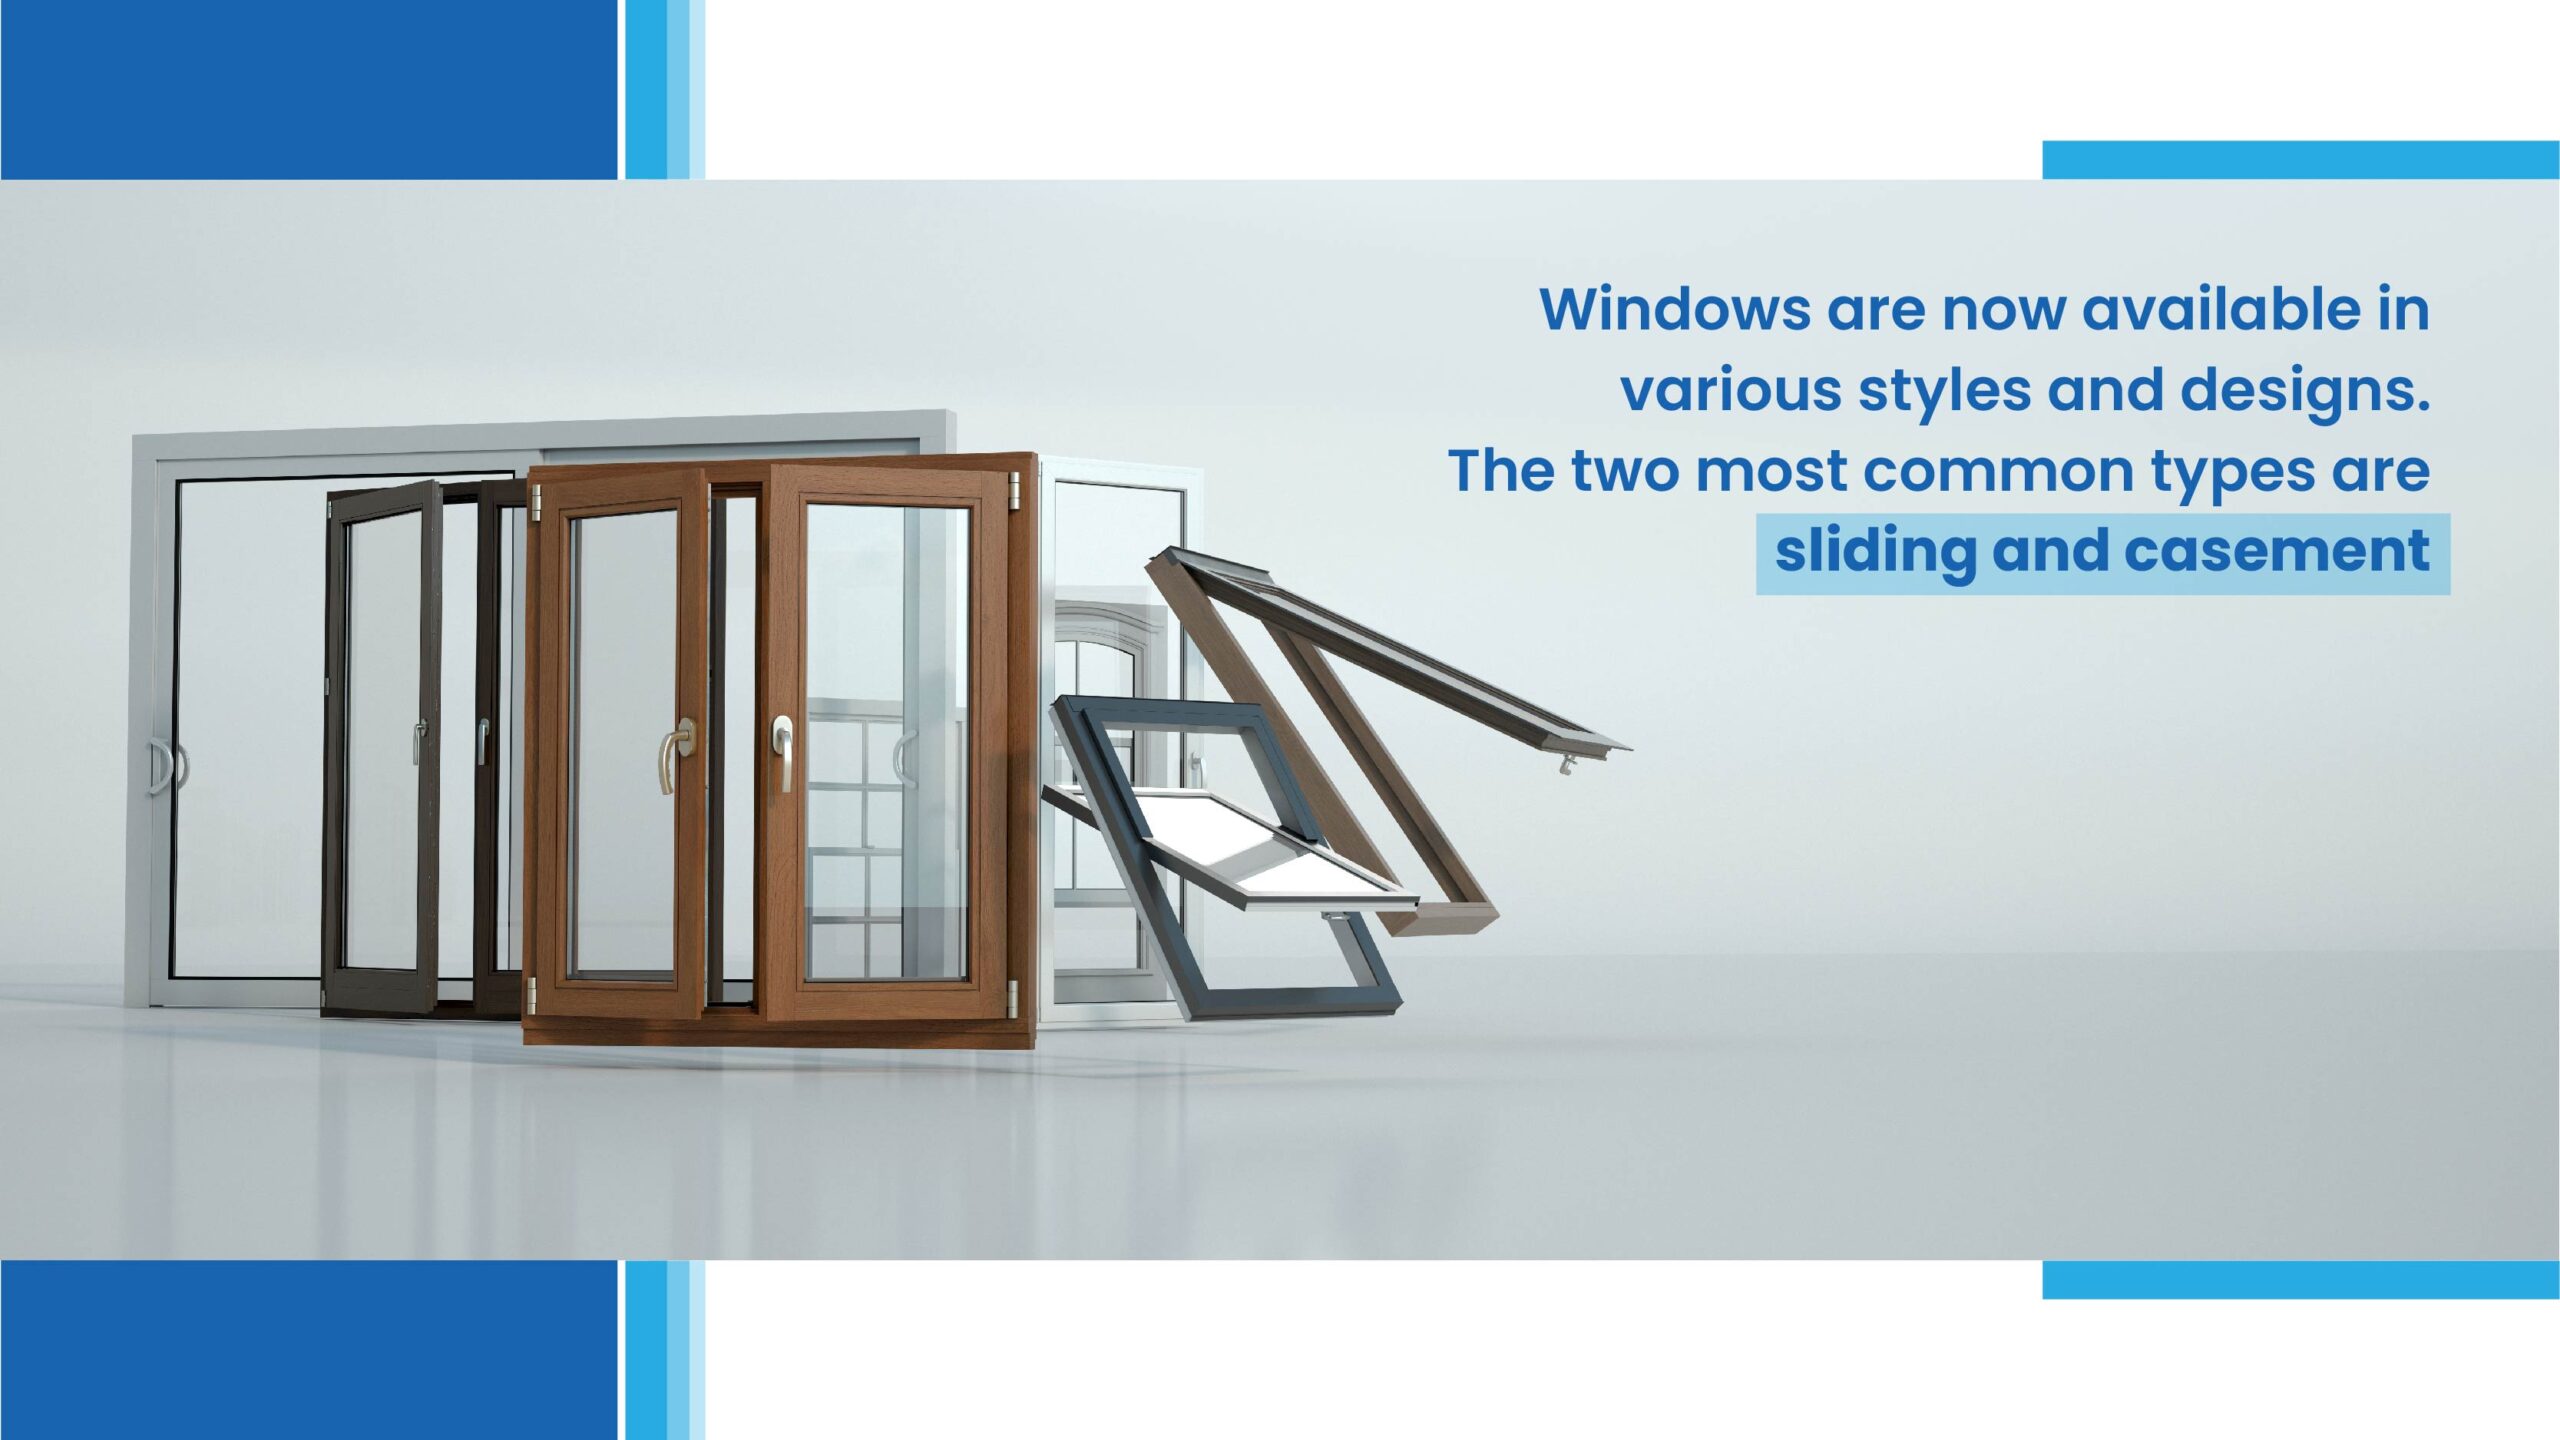 Windows are now available in various styles and designs